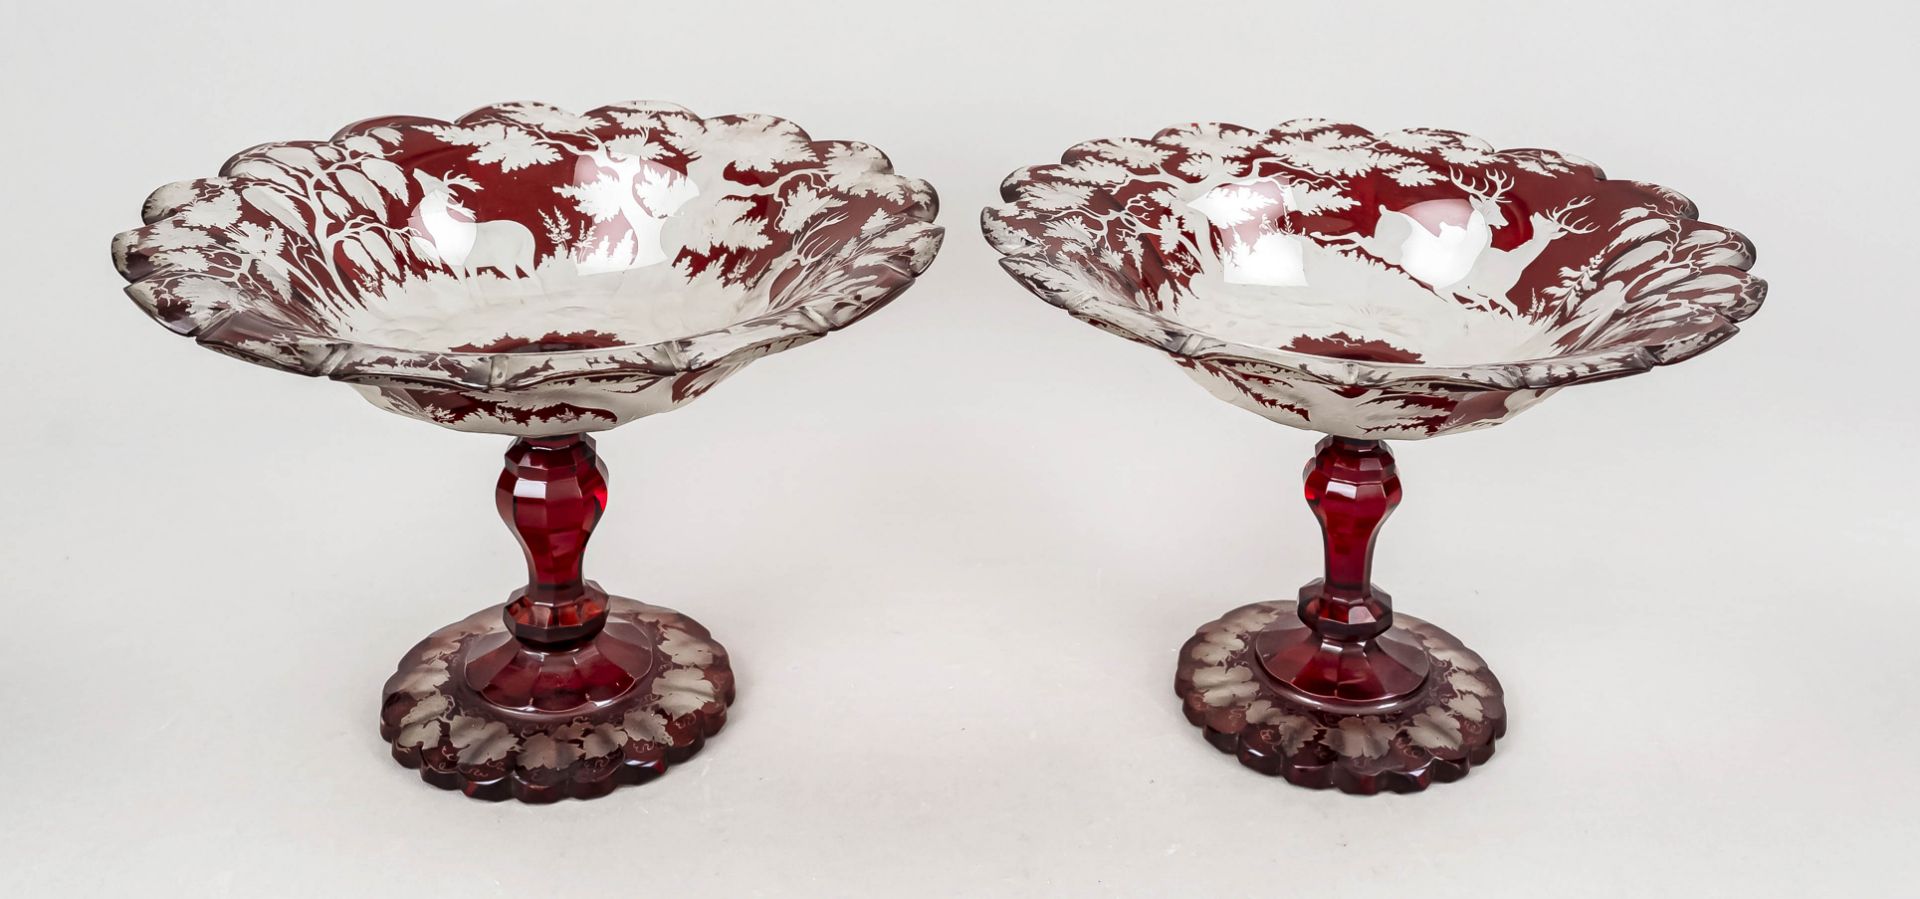 Pair of large centerpieces, Bohemia, 19th century, flower-shaped stand, baluster stem, curved